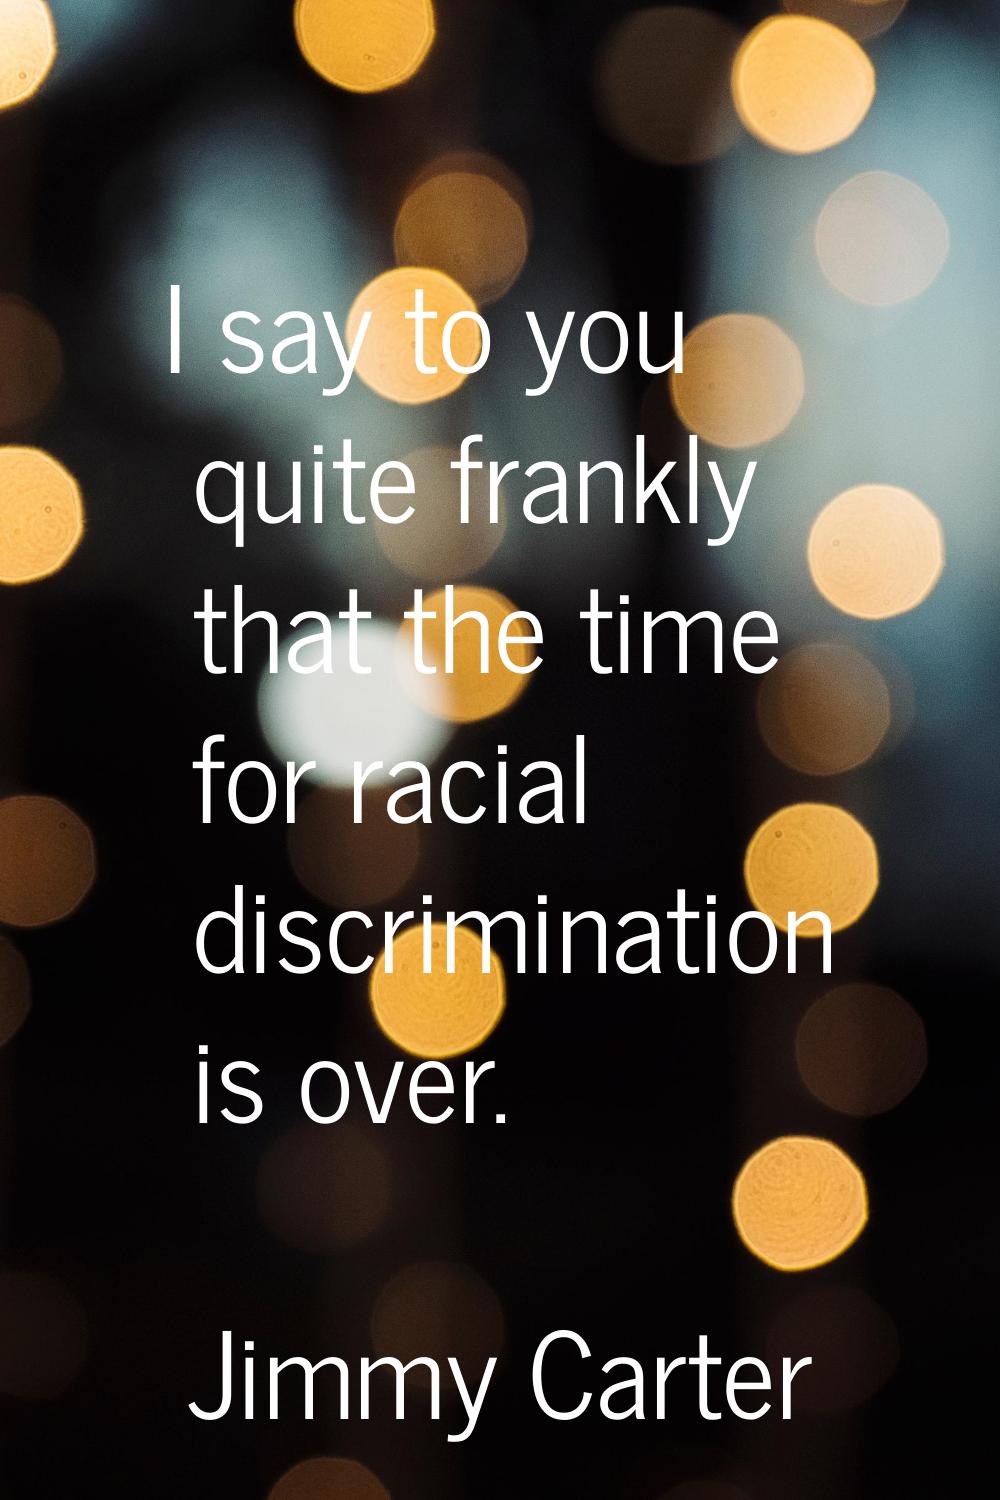 I say to you quite frankly that the time for racial discrimination is over.